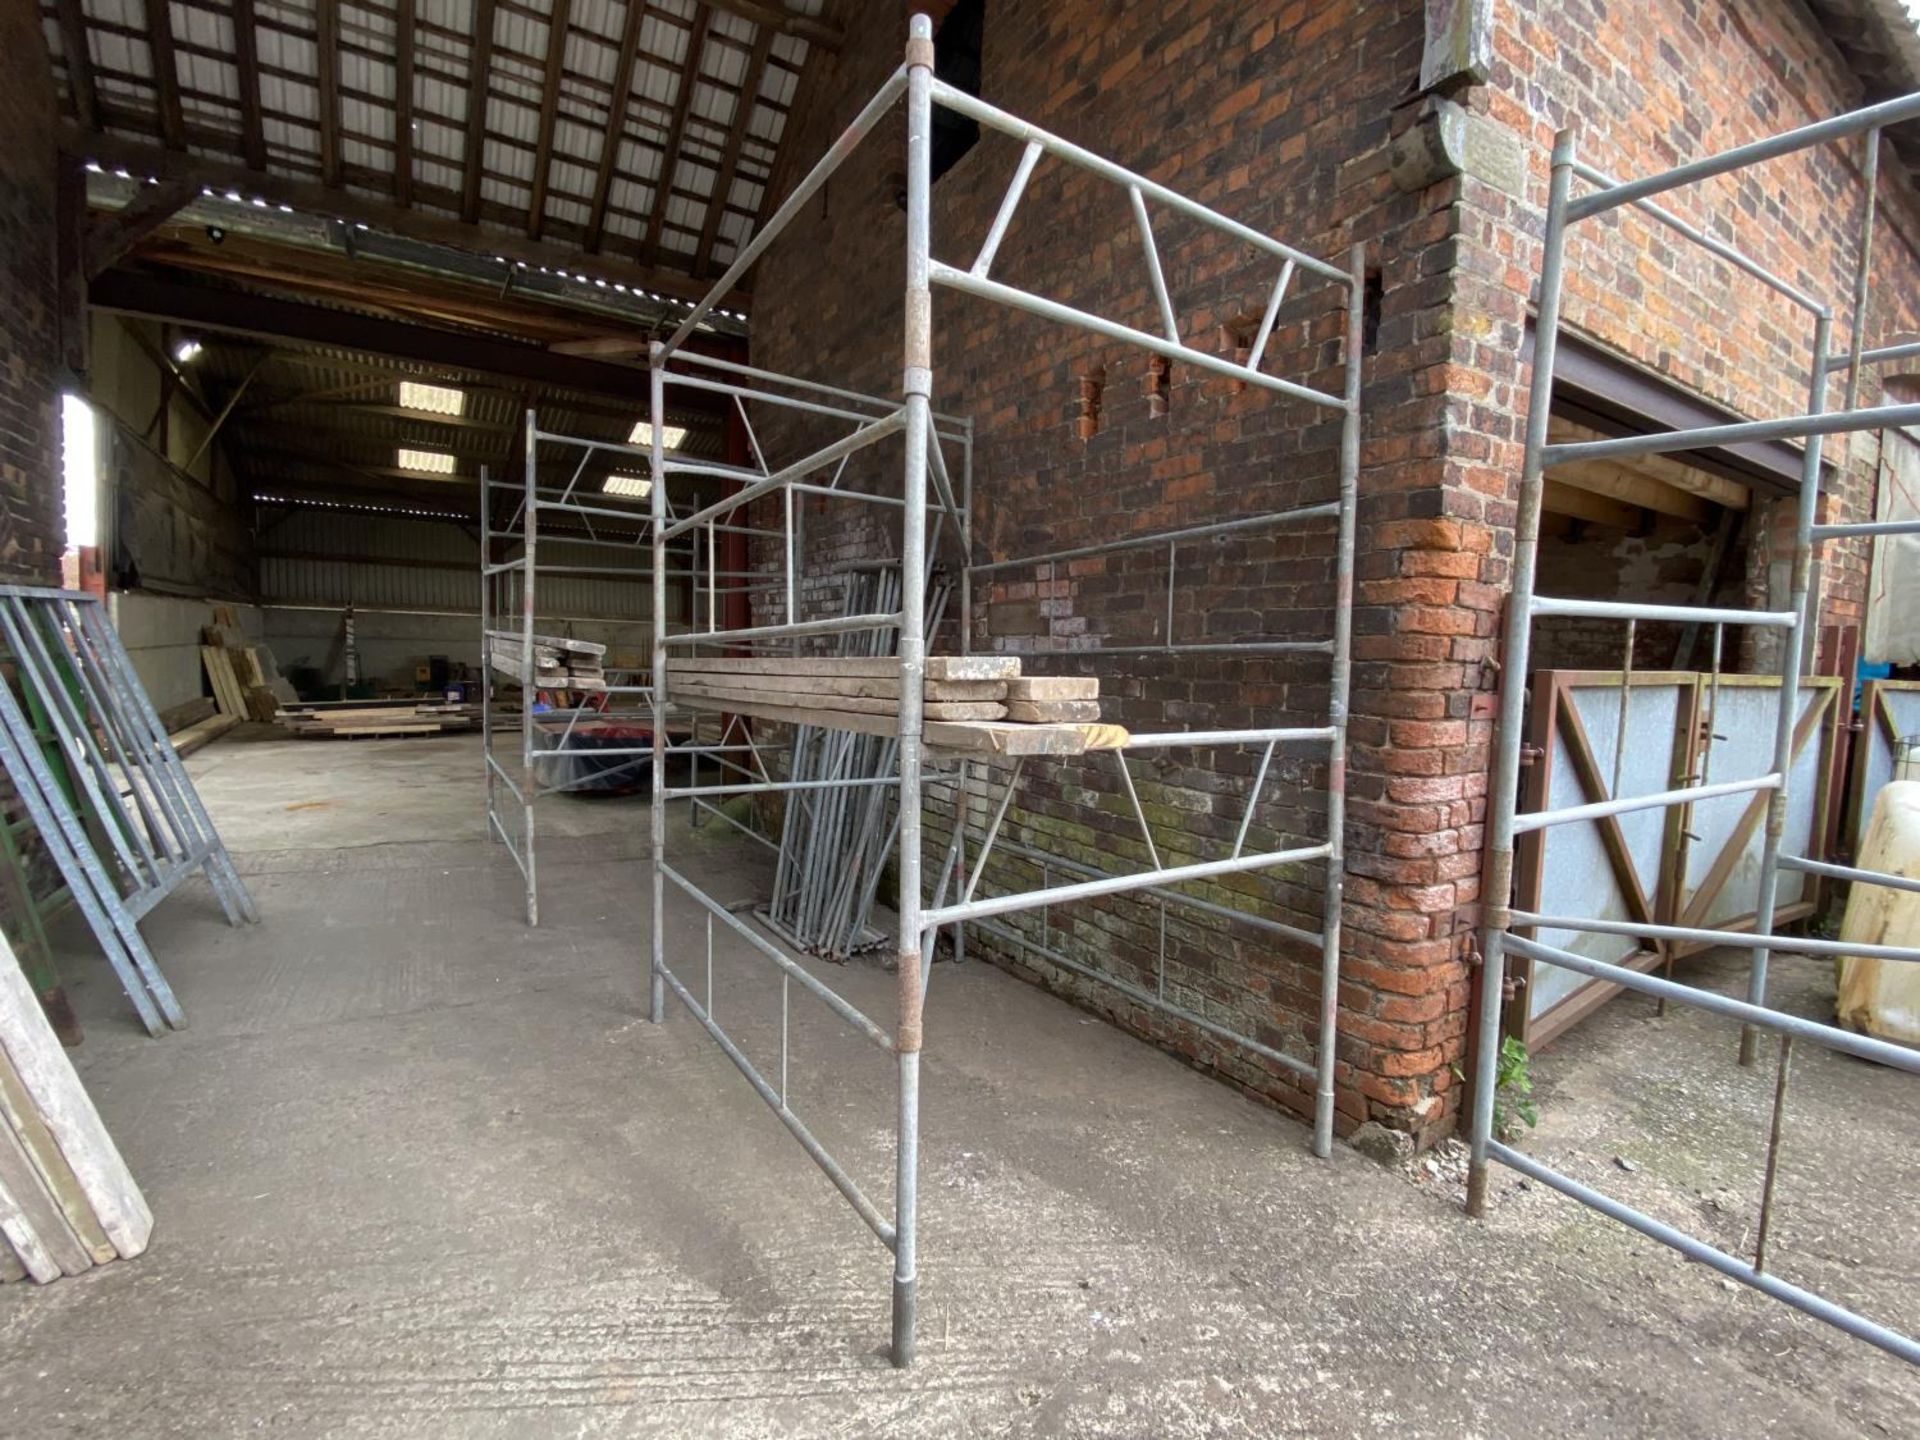 13 SECTIONS SCAFFOLD TOWER WITH 4 JACK LEGS, 2' STABILIZERS AND TIMBER PLATFORM TO REACH 30' - Image 2 of 4